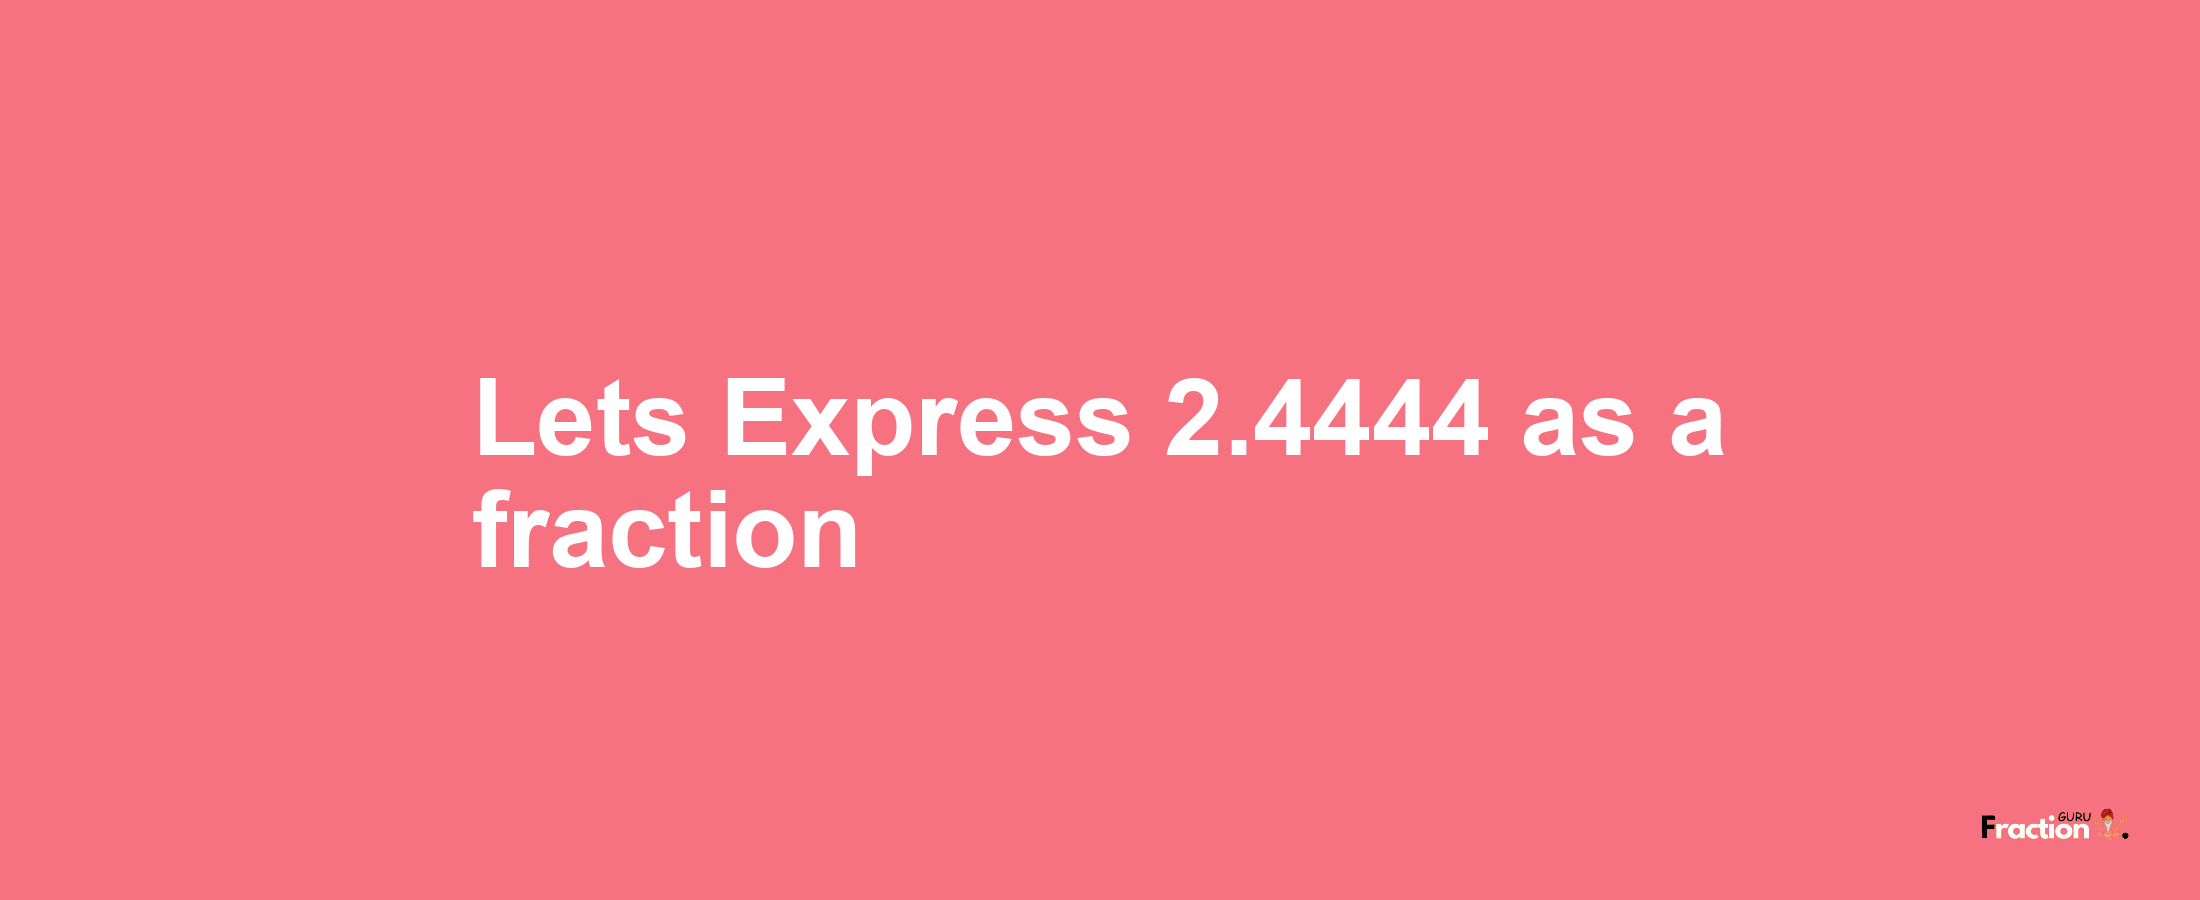 Lets Express 2.4444 as afraction